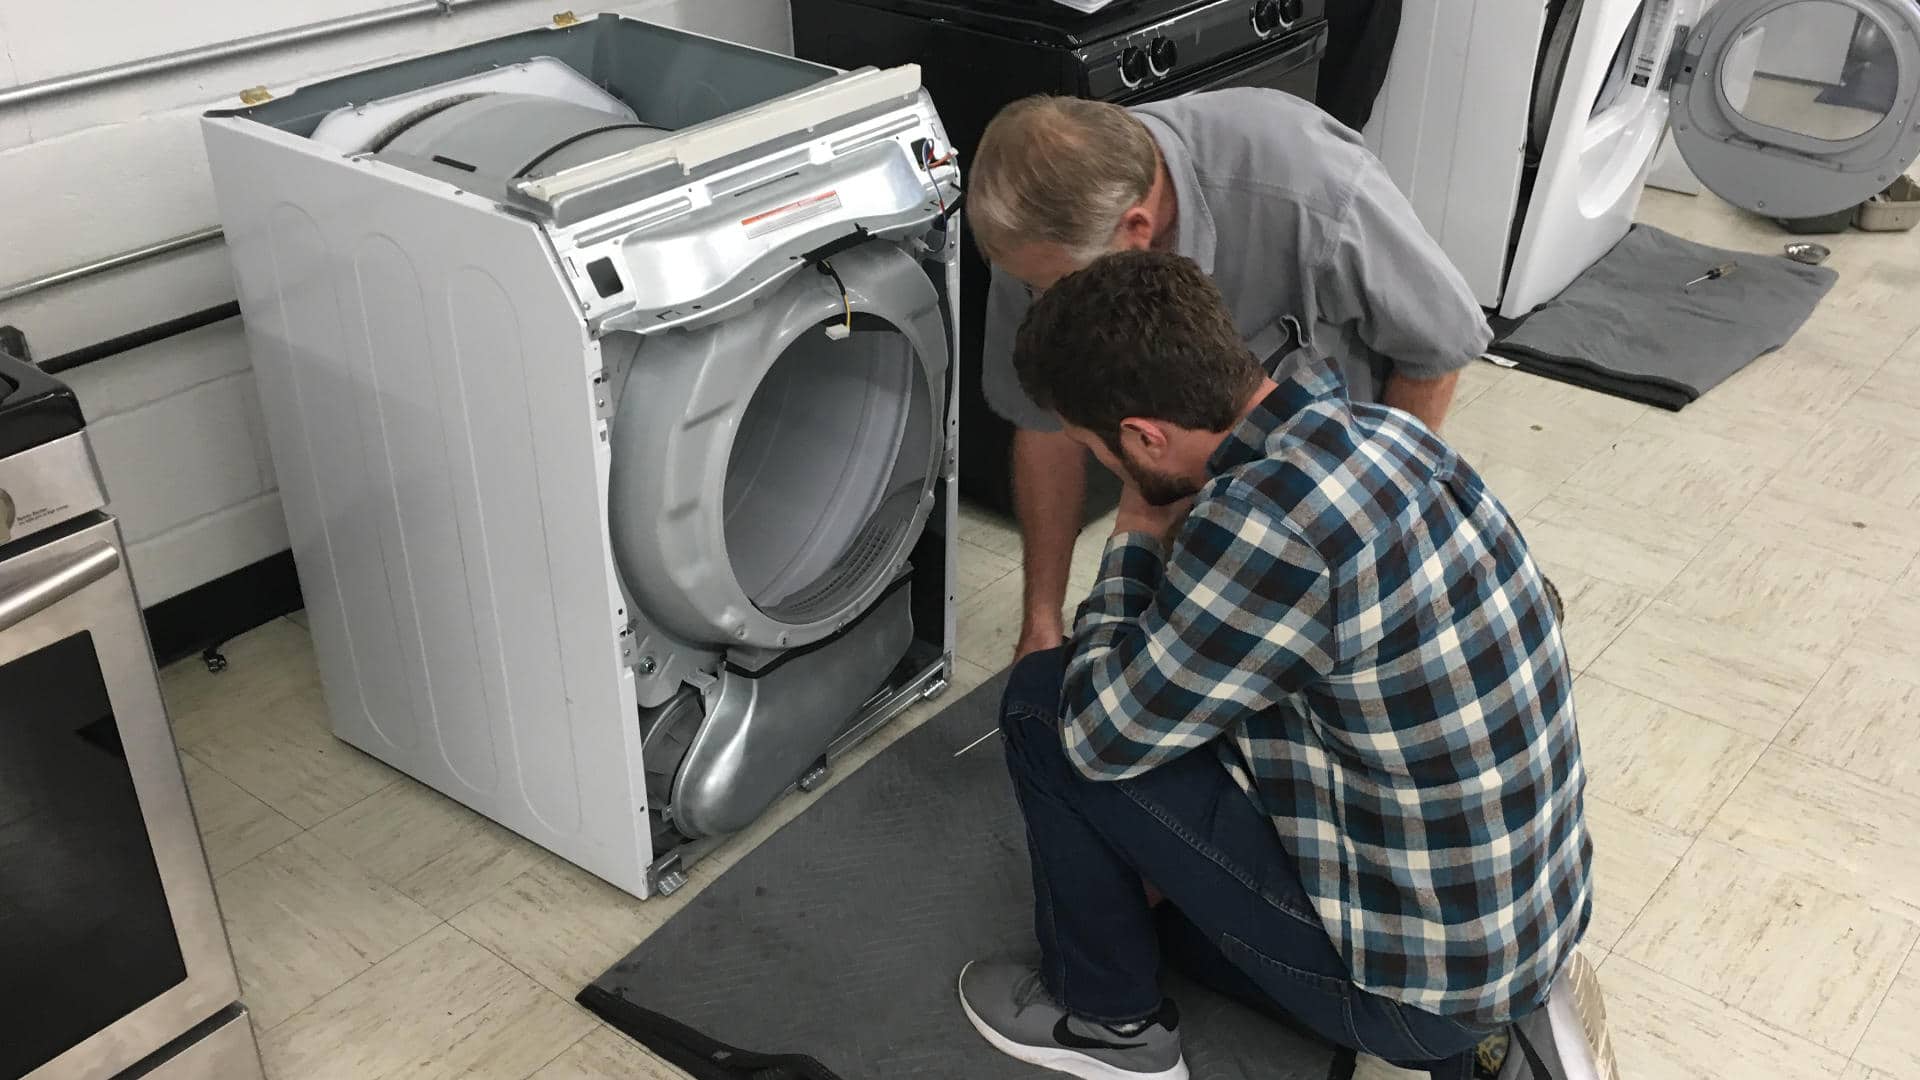 Featured image for “Appliance Repair Shop Owners: How Do You Train Your New Repair Technicians?”